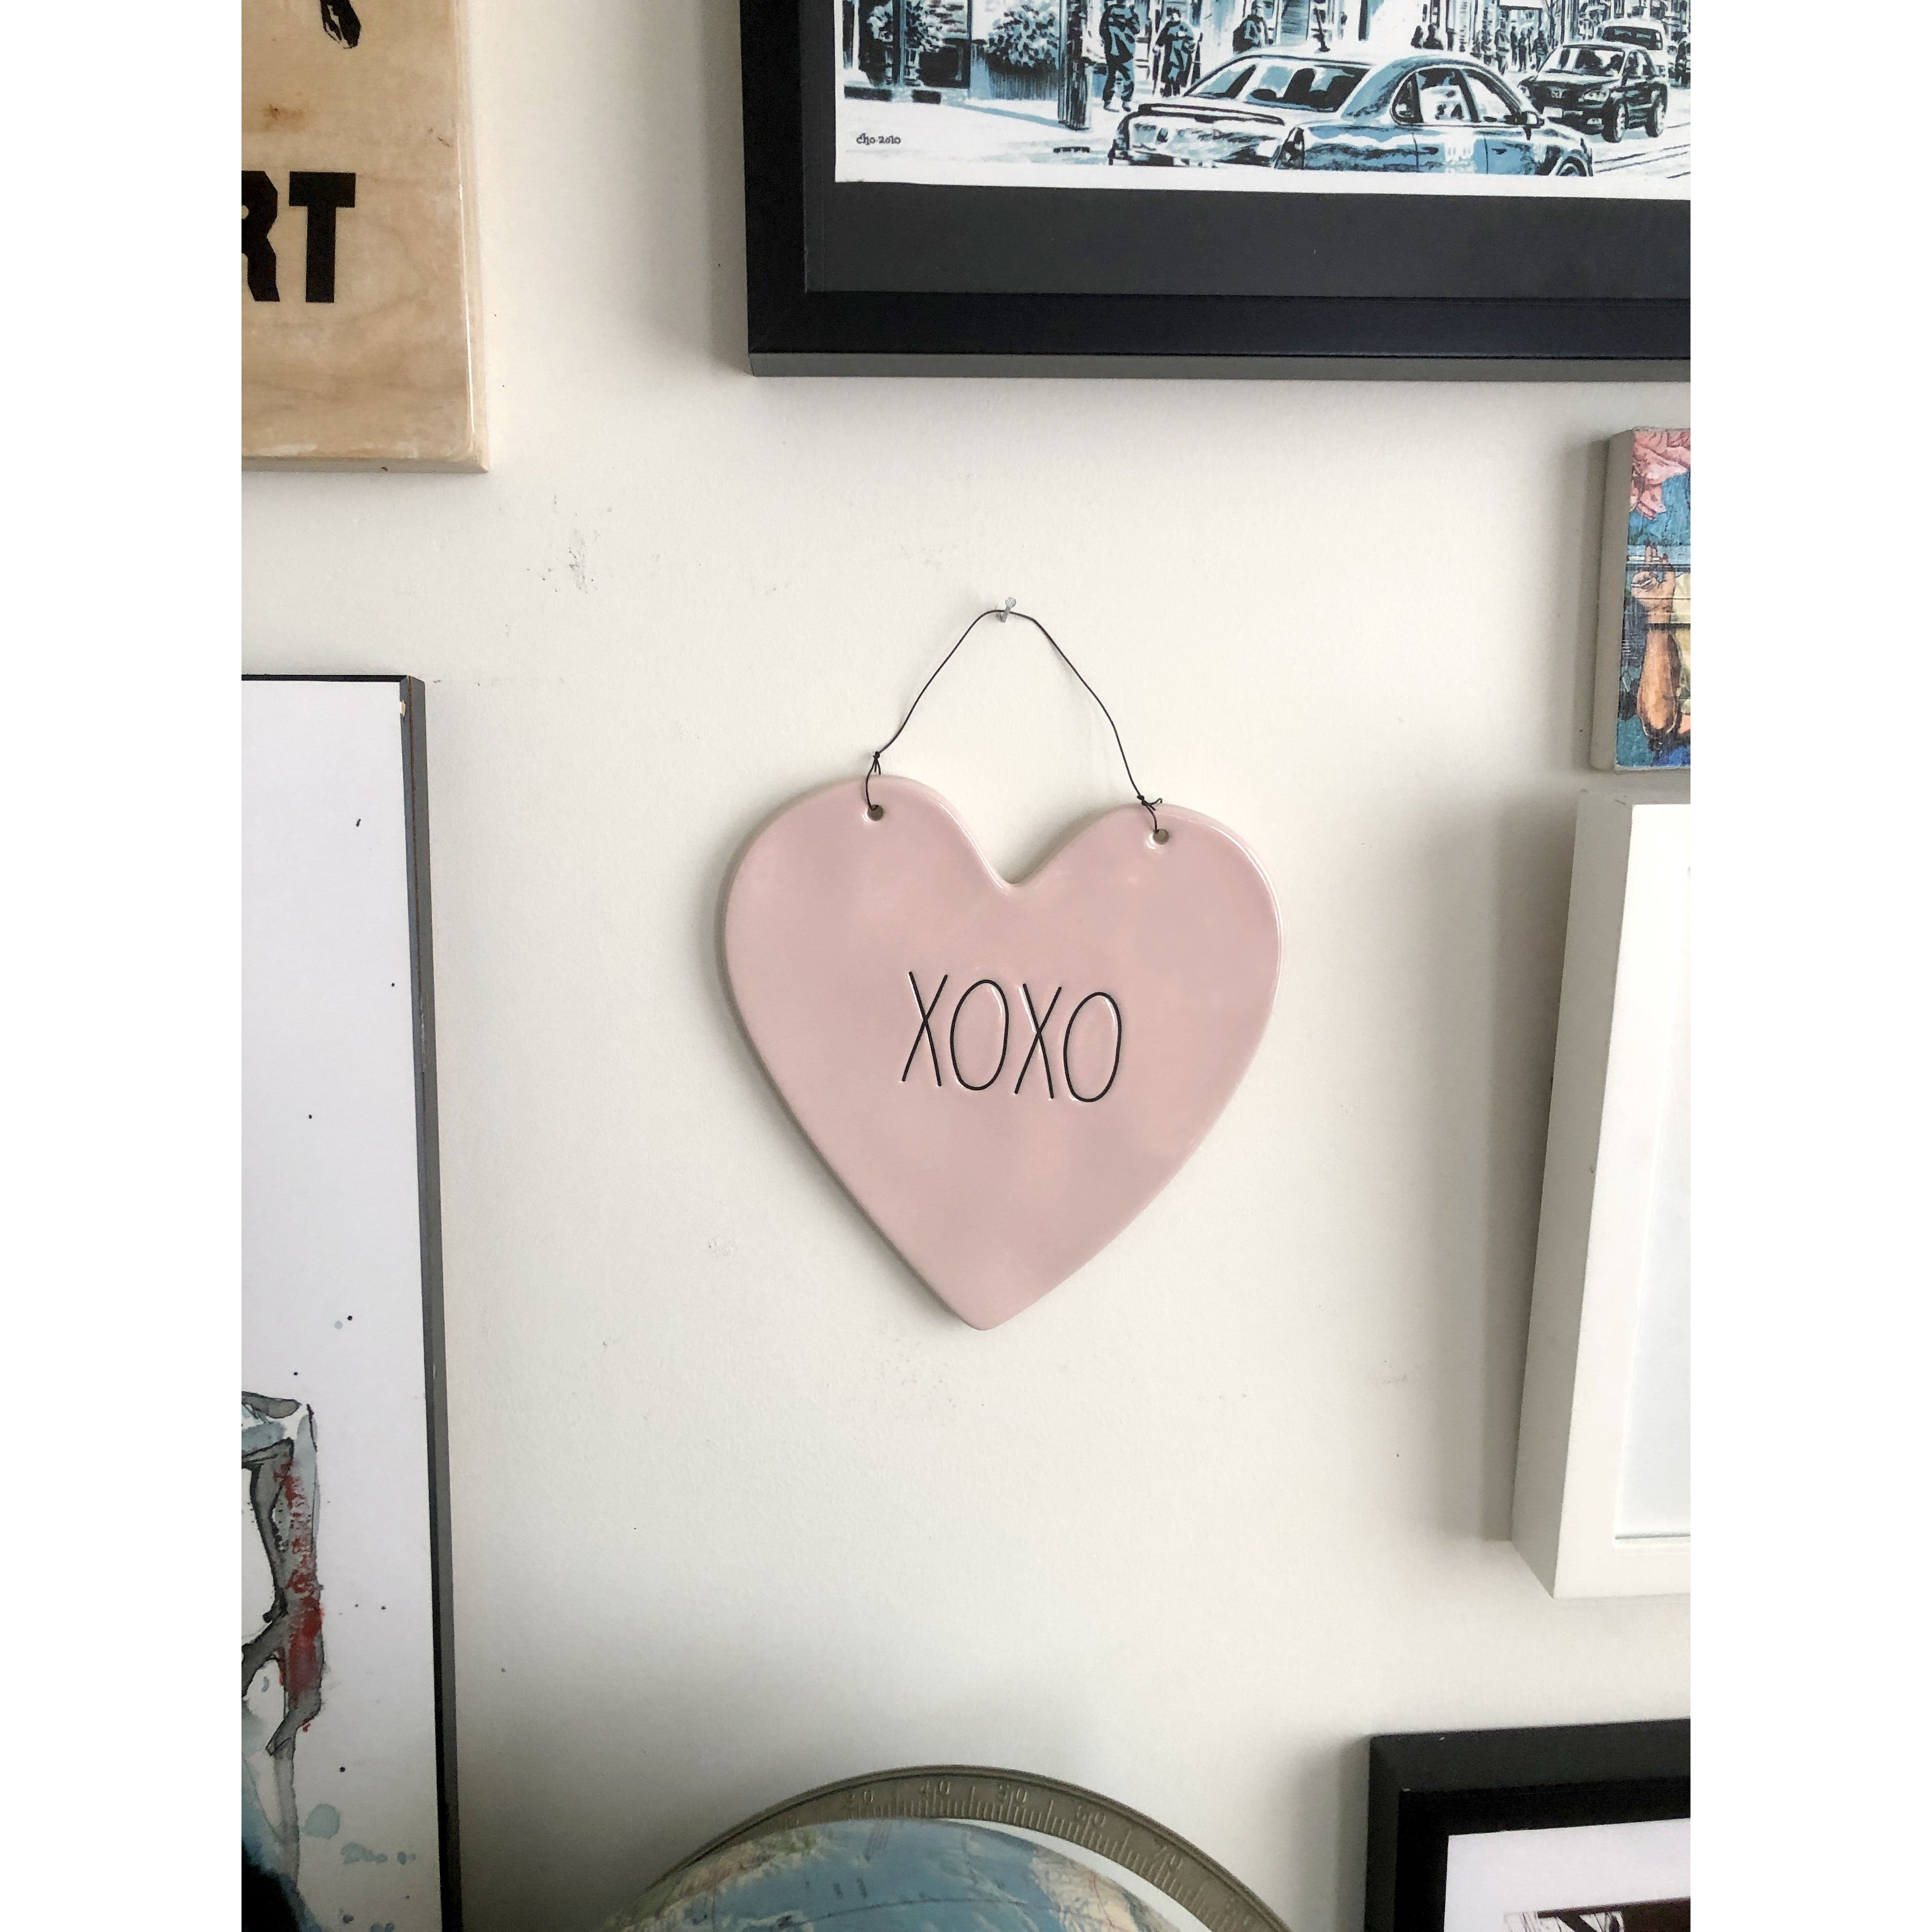 Rae Dunn Heart Shaped Ceramic Wall Hanging in Pink with XOXO In Black Font